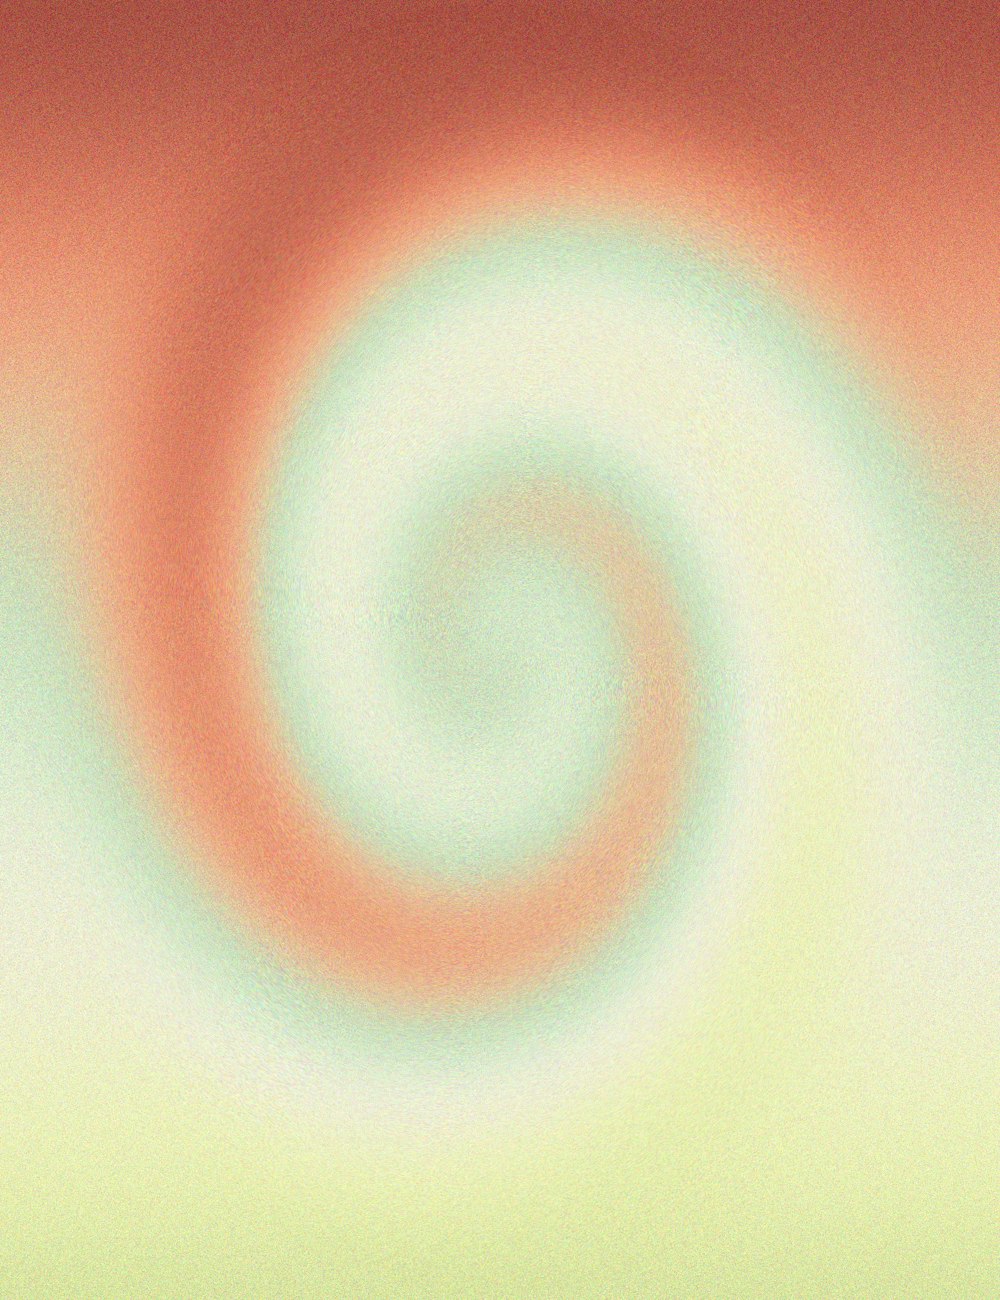 a blurry image of a red and green swirl